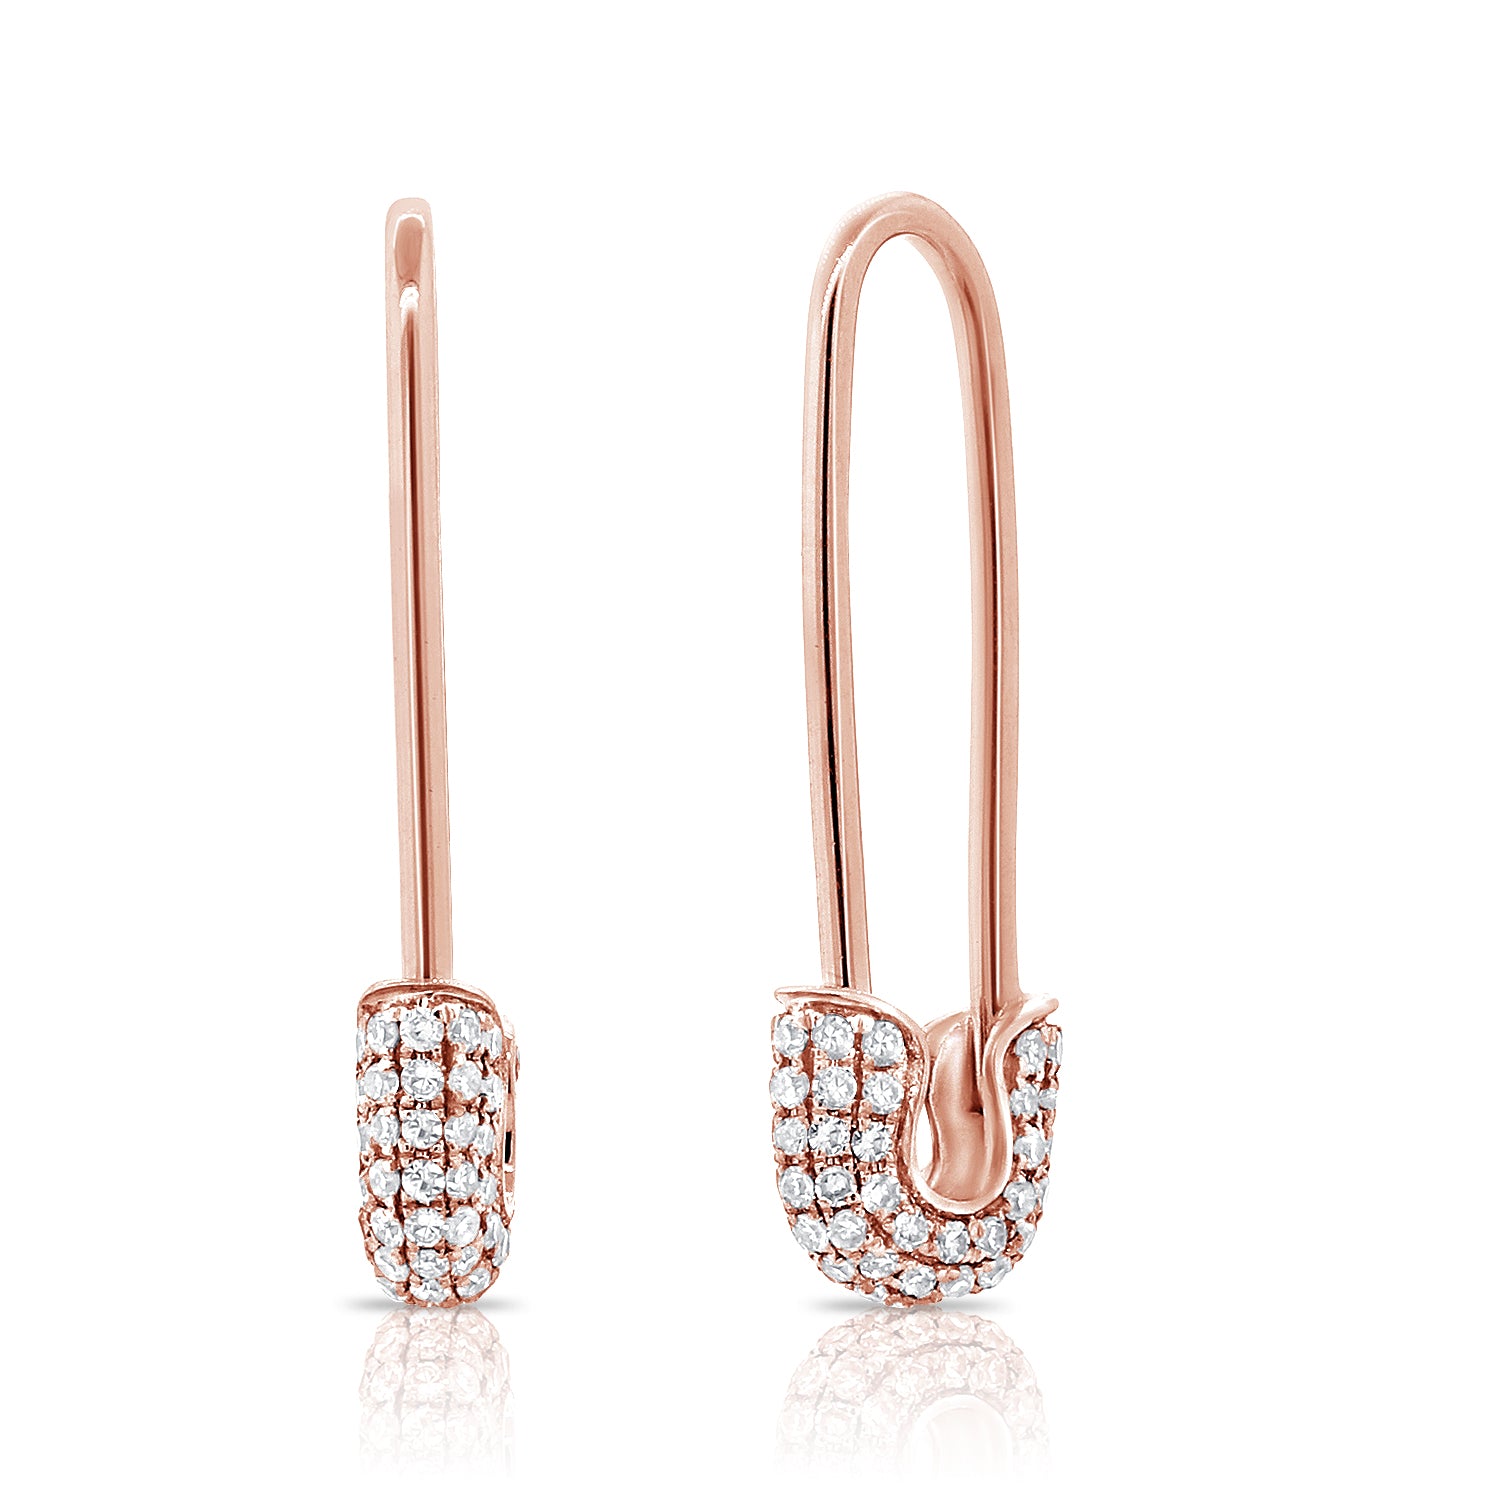 Safety Pin Design Earrings